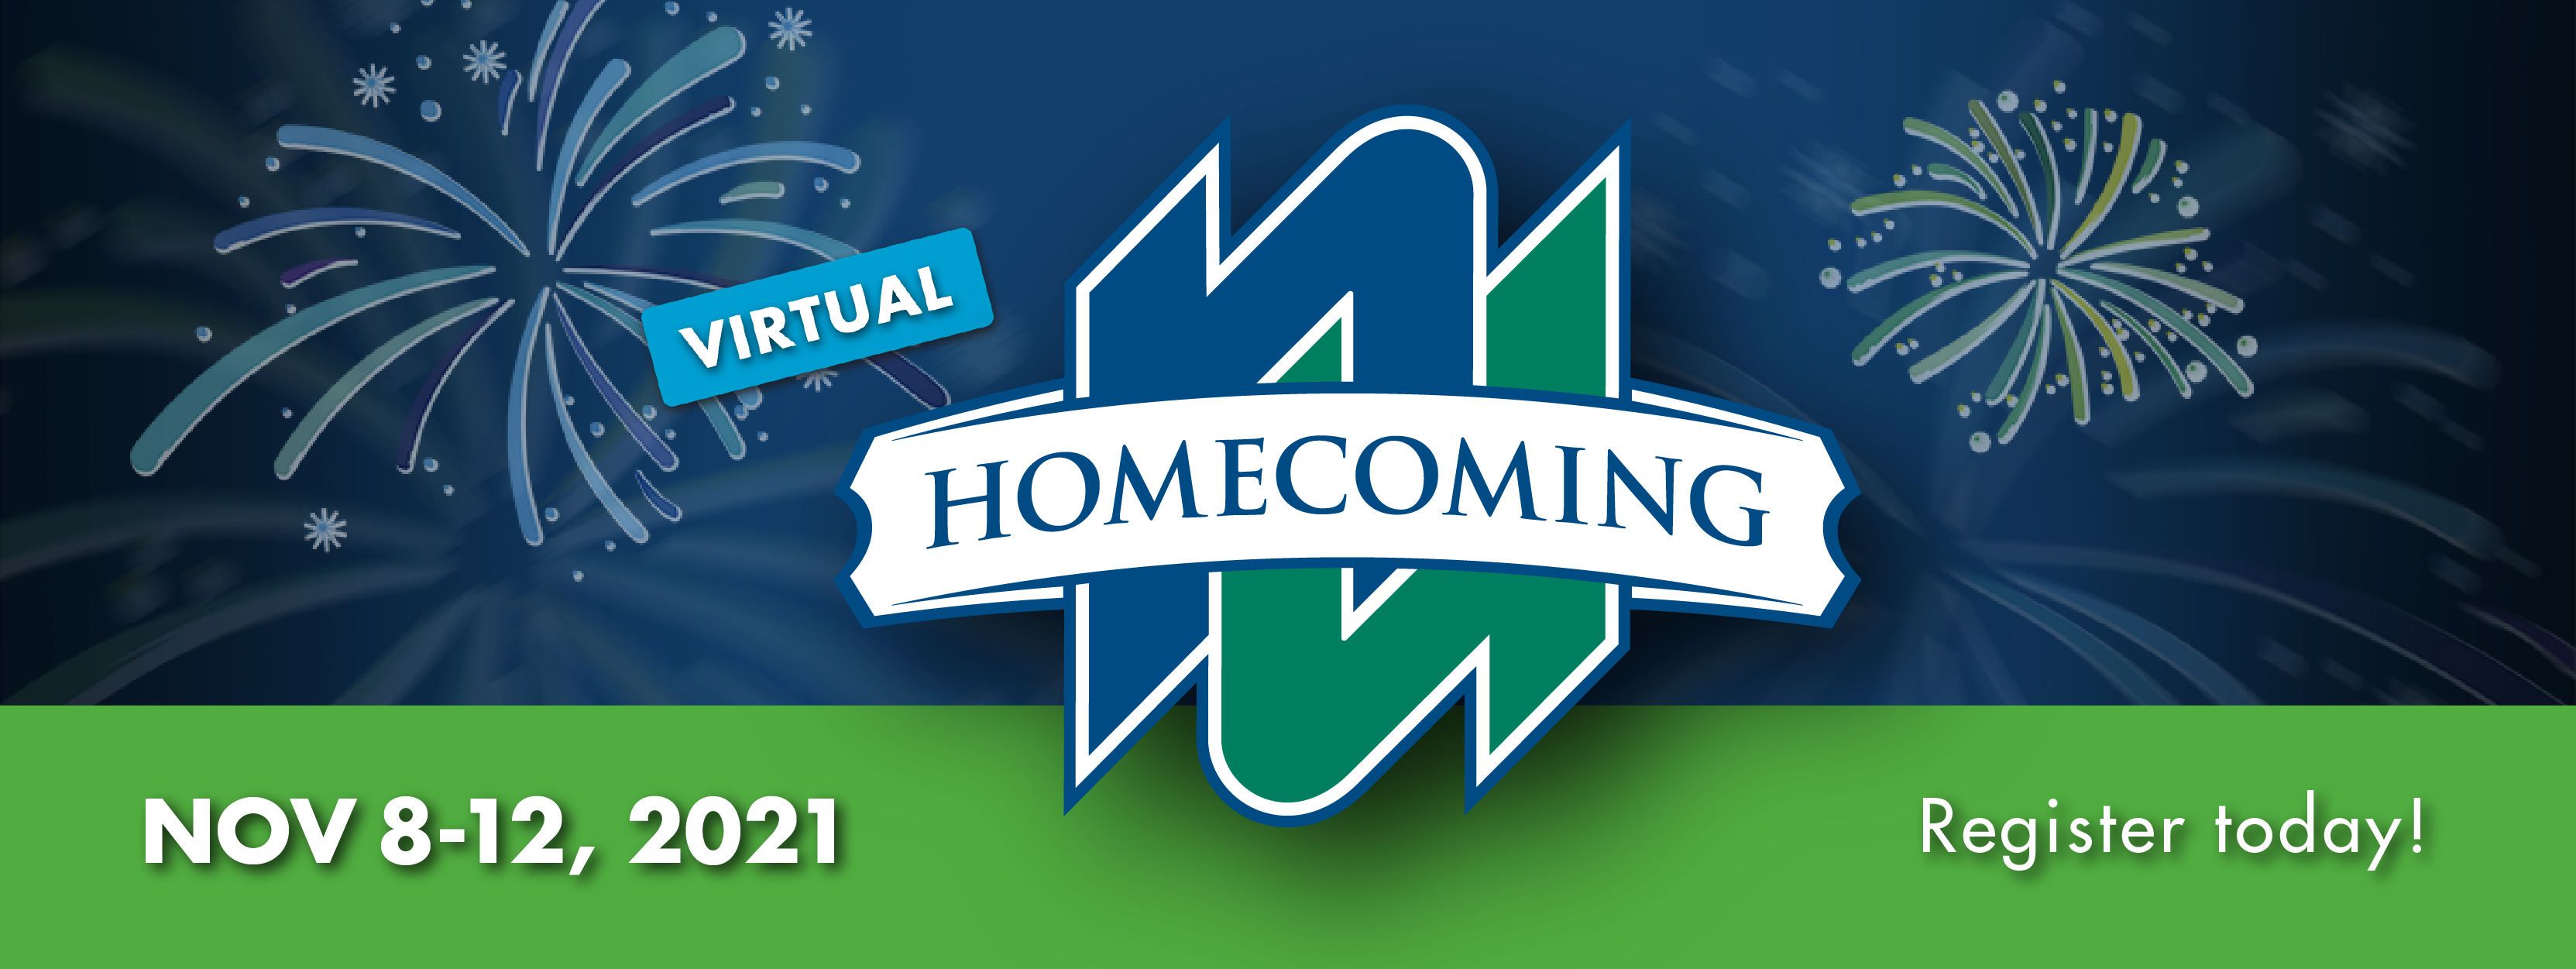 Virtual Homecoming 2021 - register today